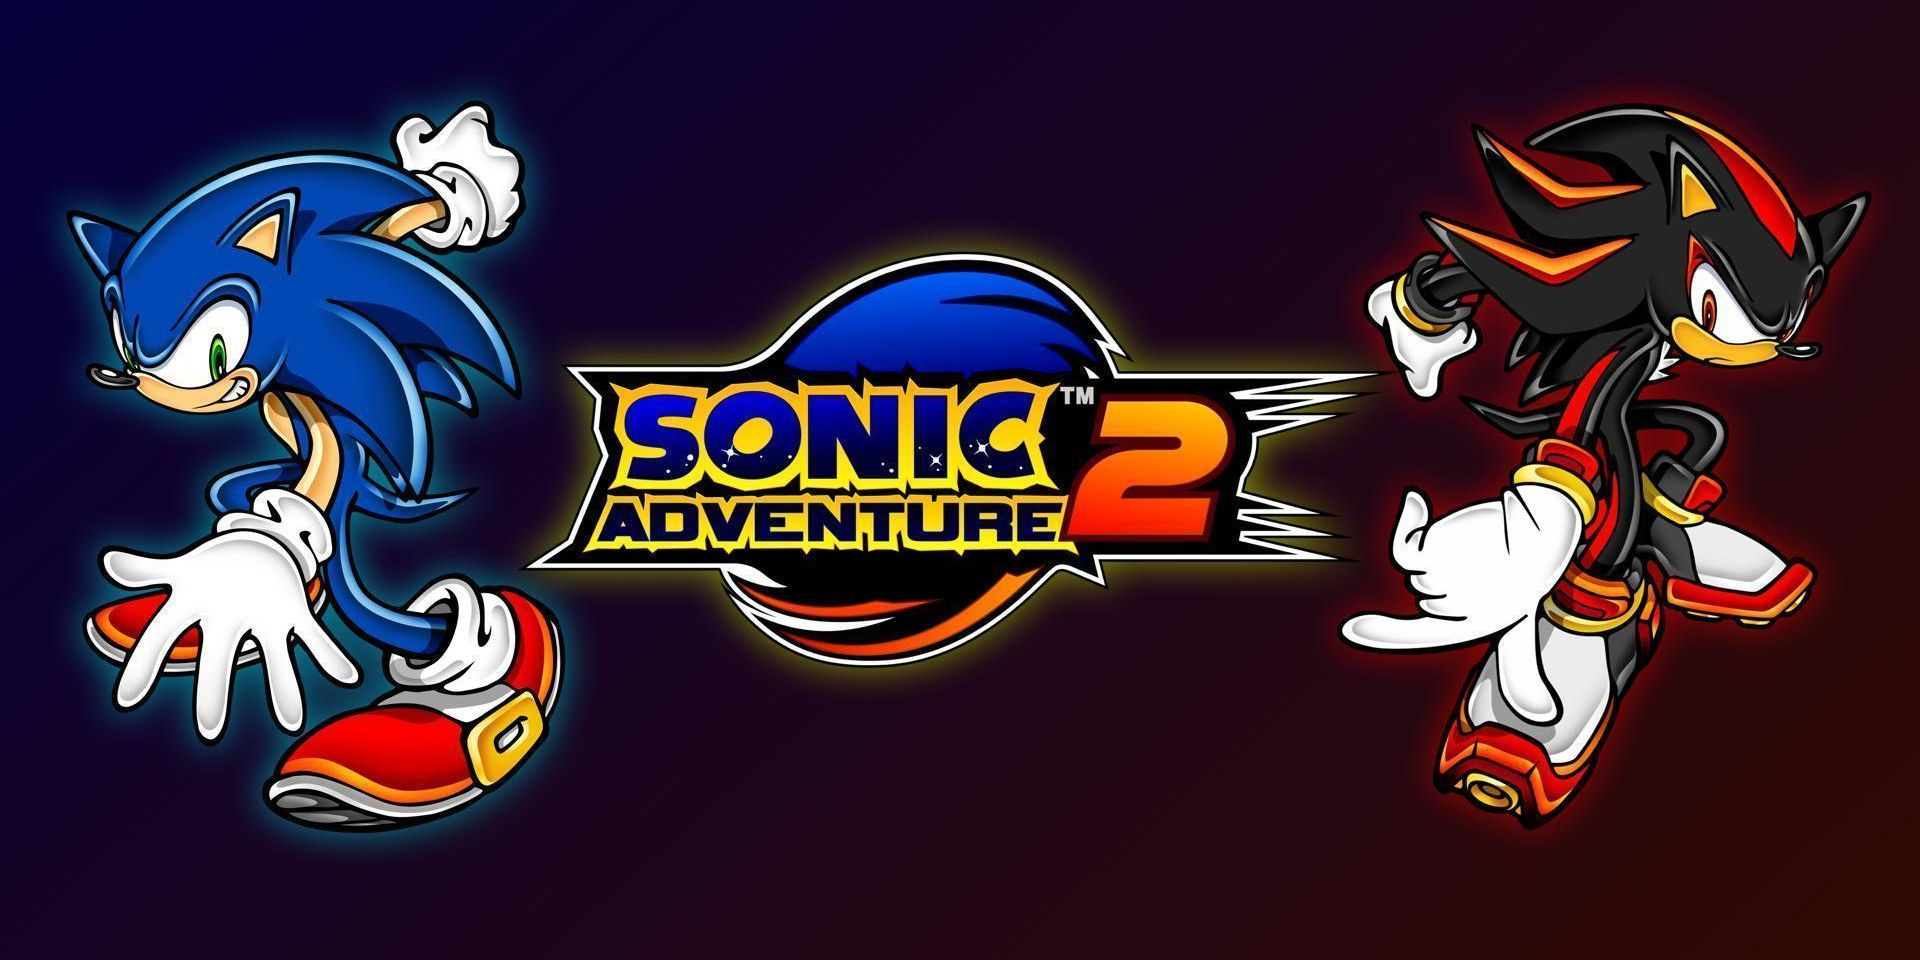 Sonic on the left and Shadow on the right with the Sonic Adventure 2 logo in the middle